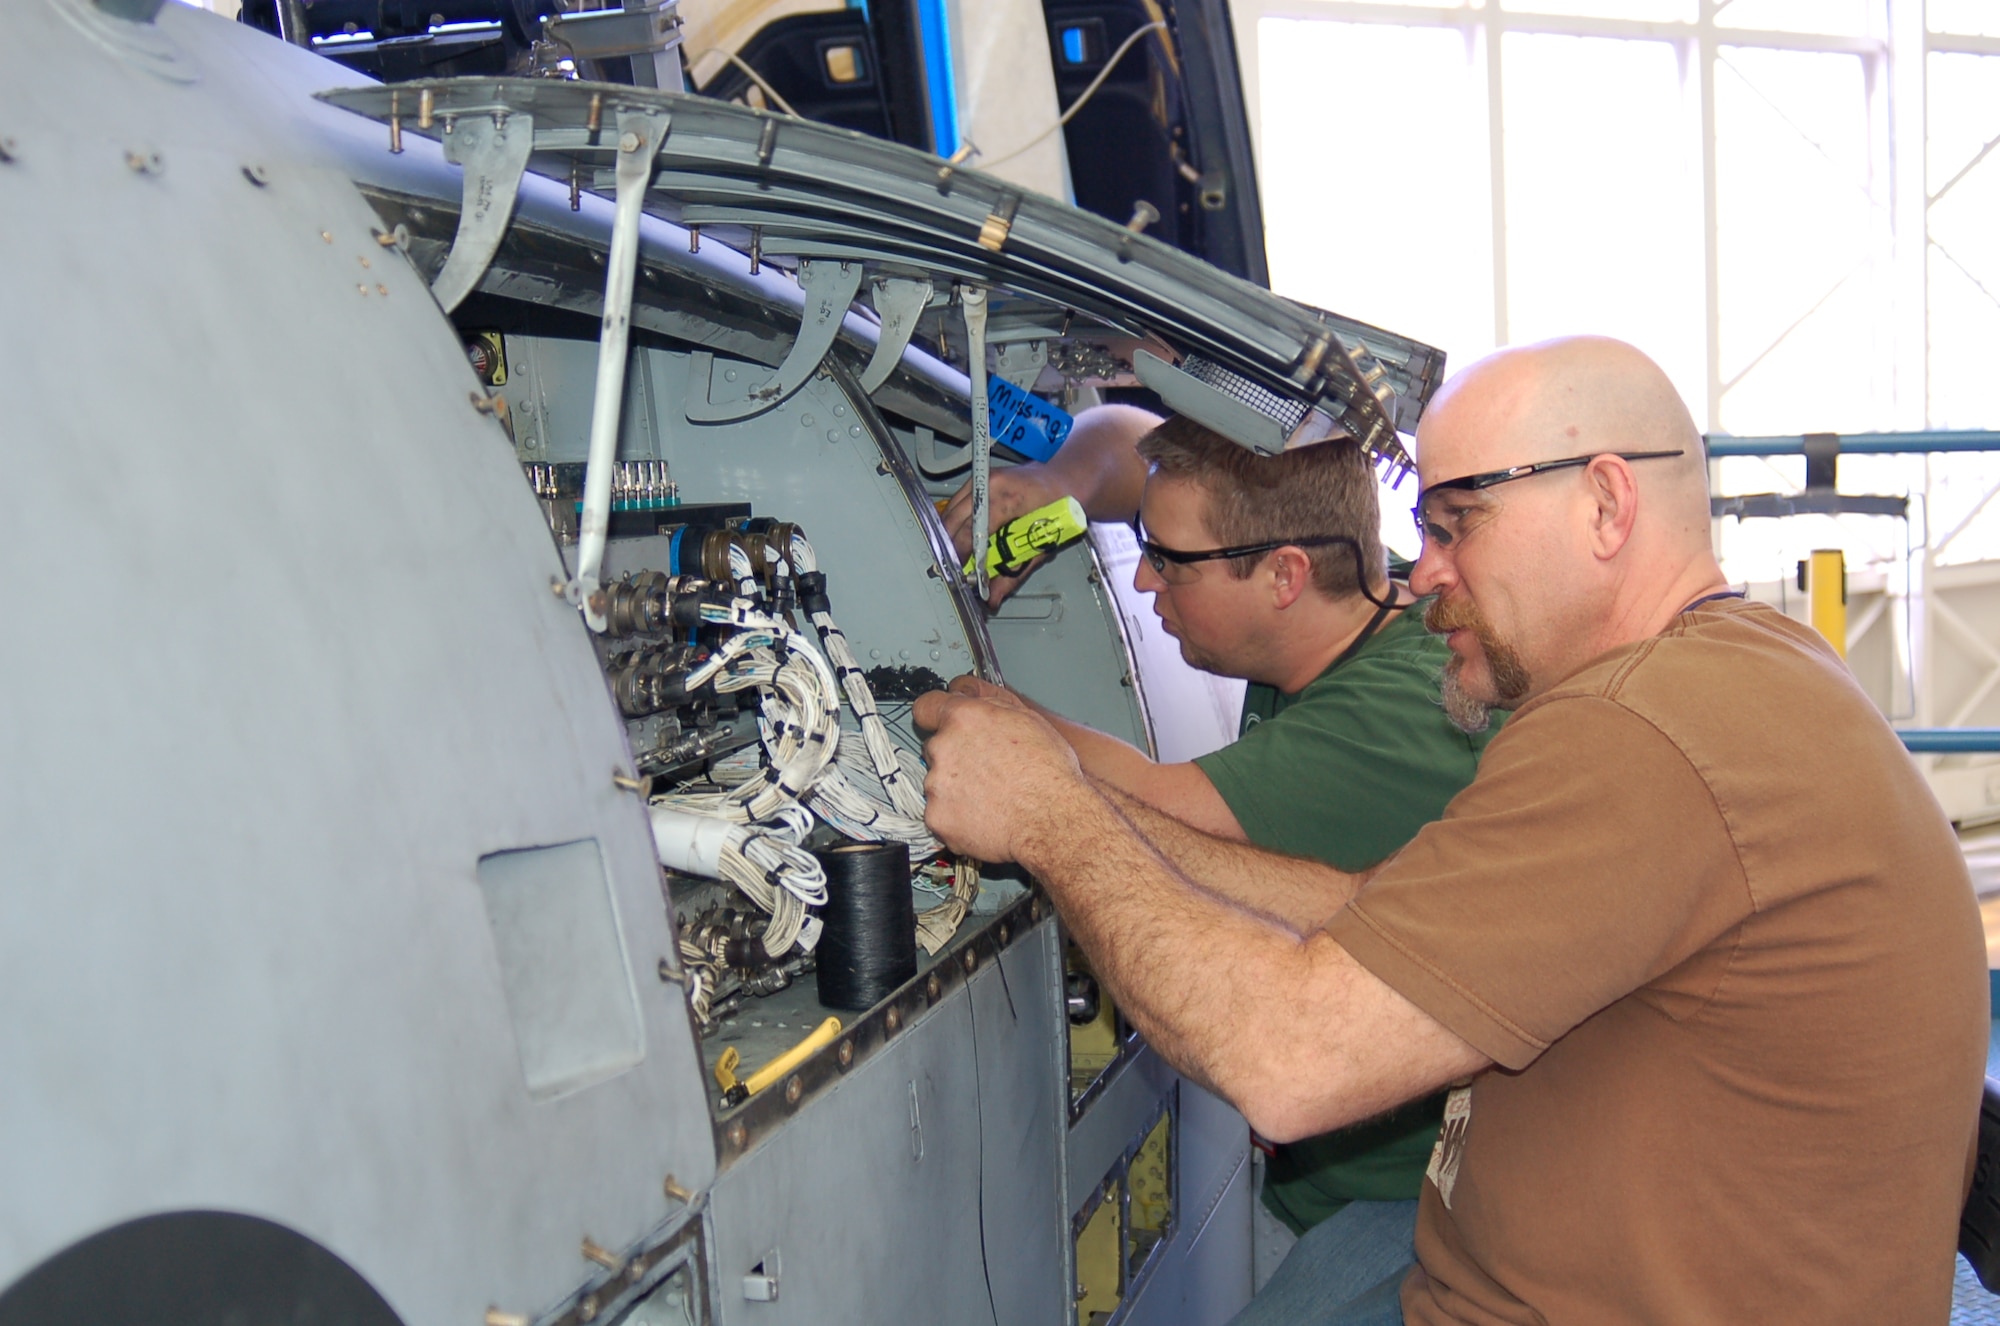 Dennis Miller (right) and Chris Ward inspect the wiring in A-10 panels before sending the aircraft to the fuel dock. Photo by Bill Orndorff